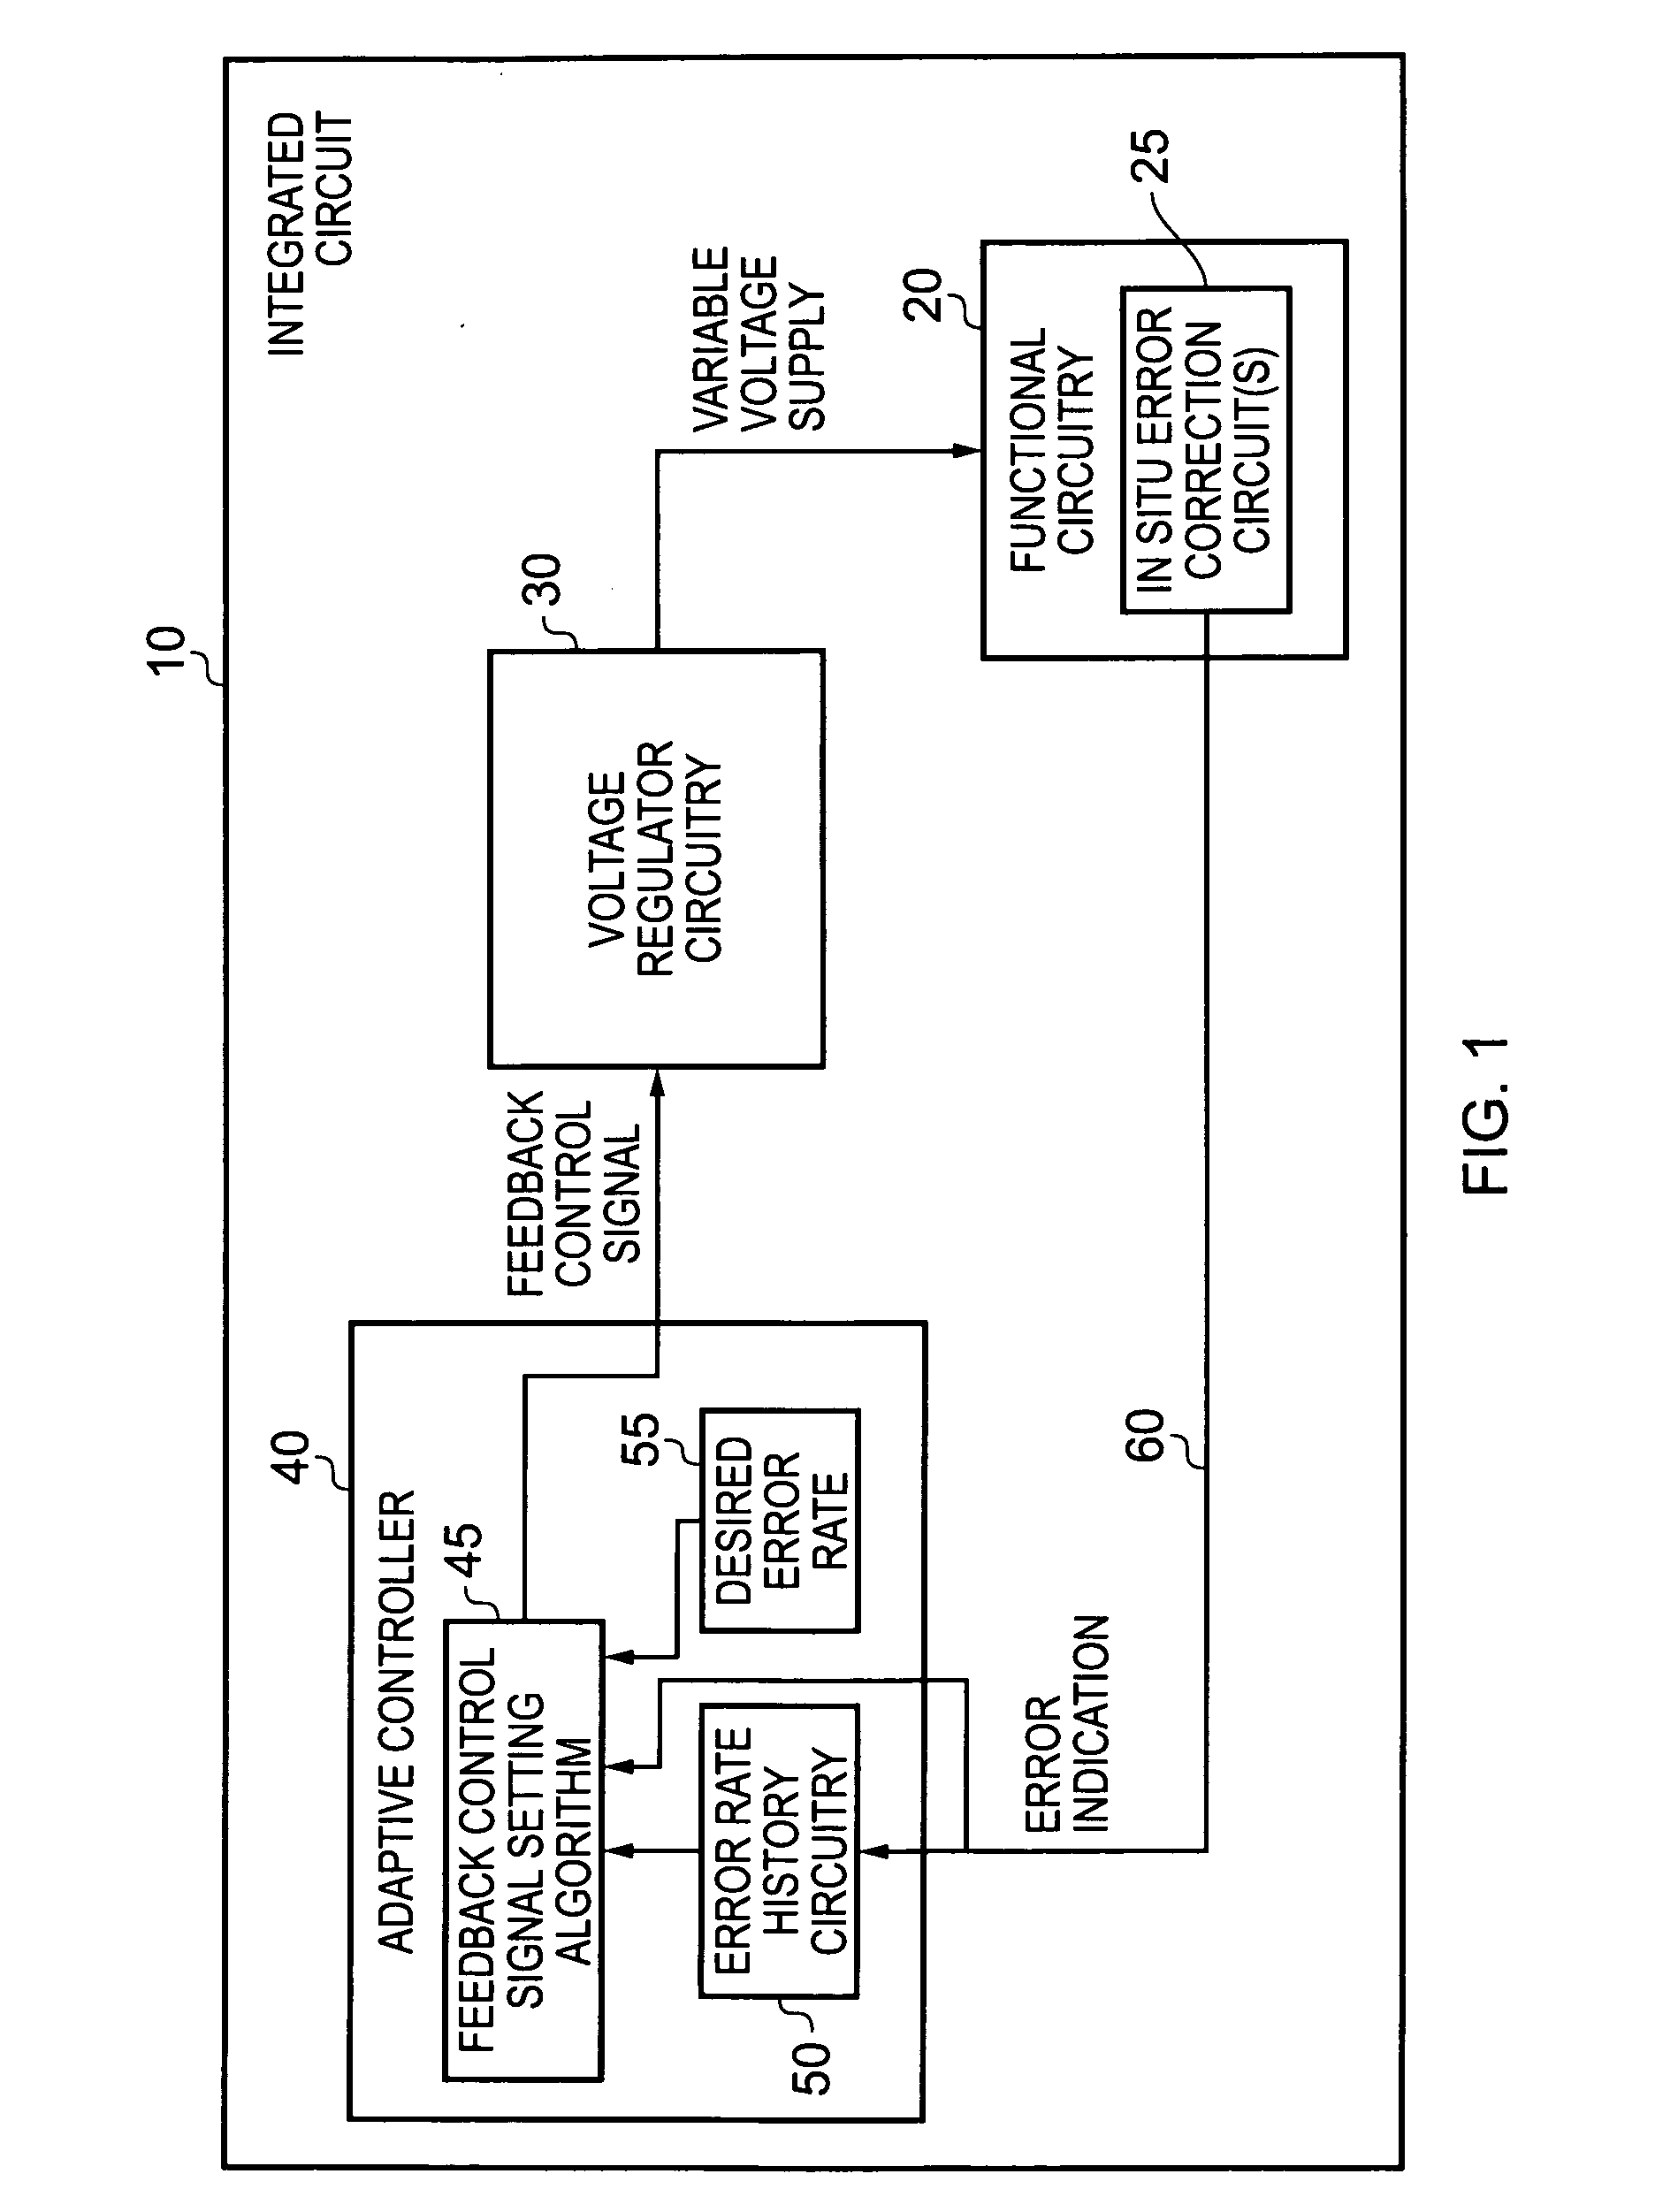 Data processing system and method for regulating a voltage supply to functional circuitry of the data processing system